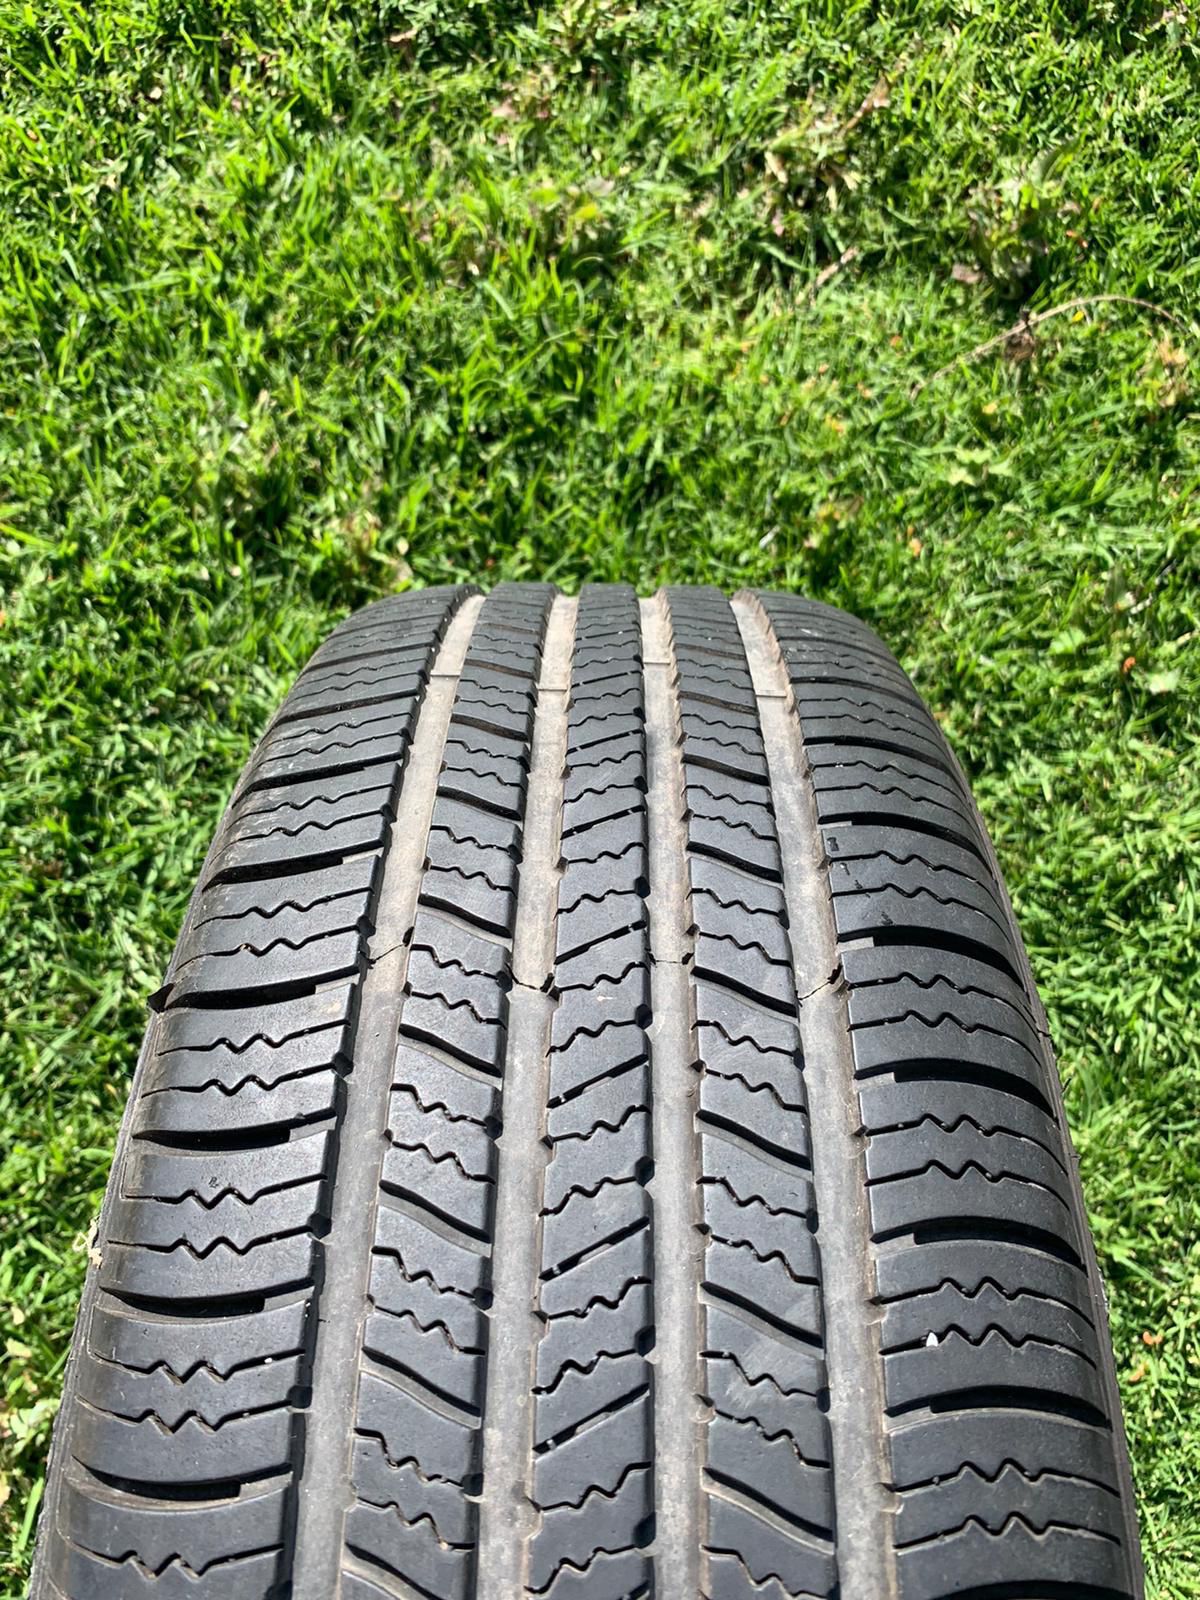 Single (1) Goodyear tire size 235/65/18 with 50% tread left on it Selling tire only no installation